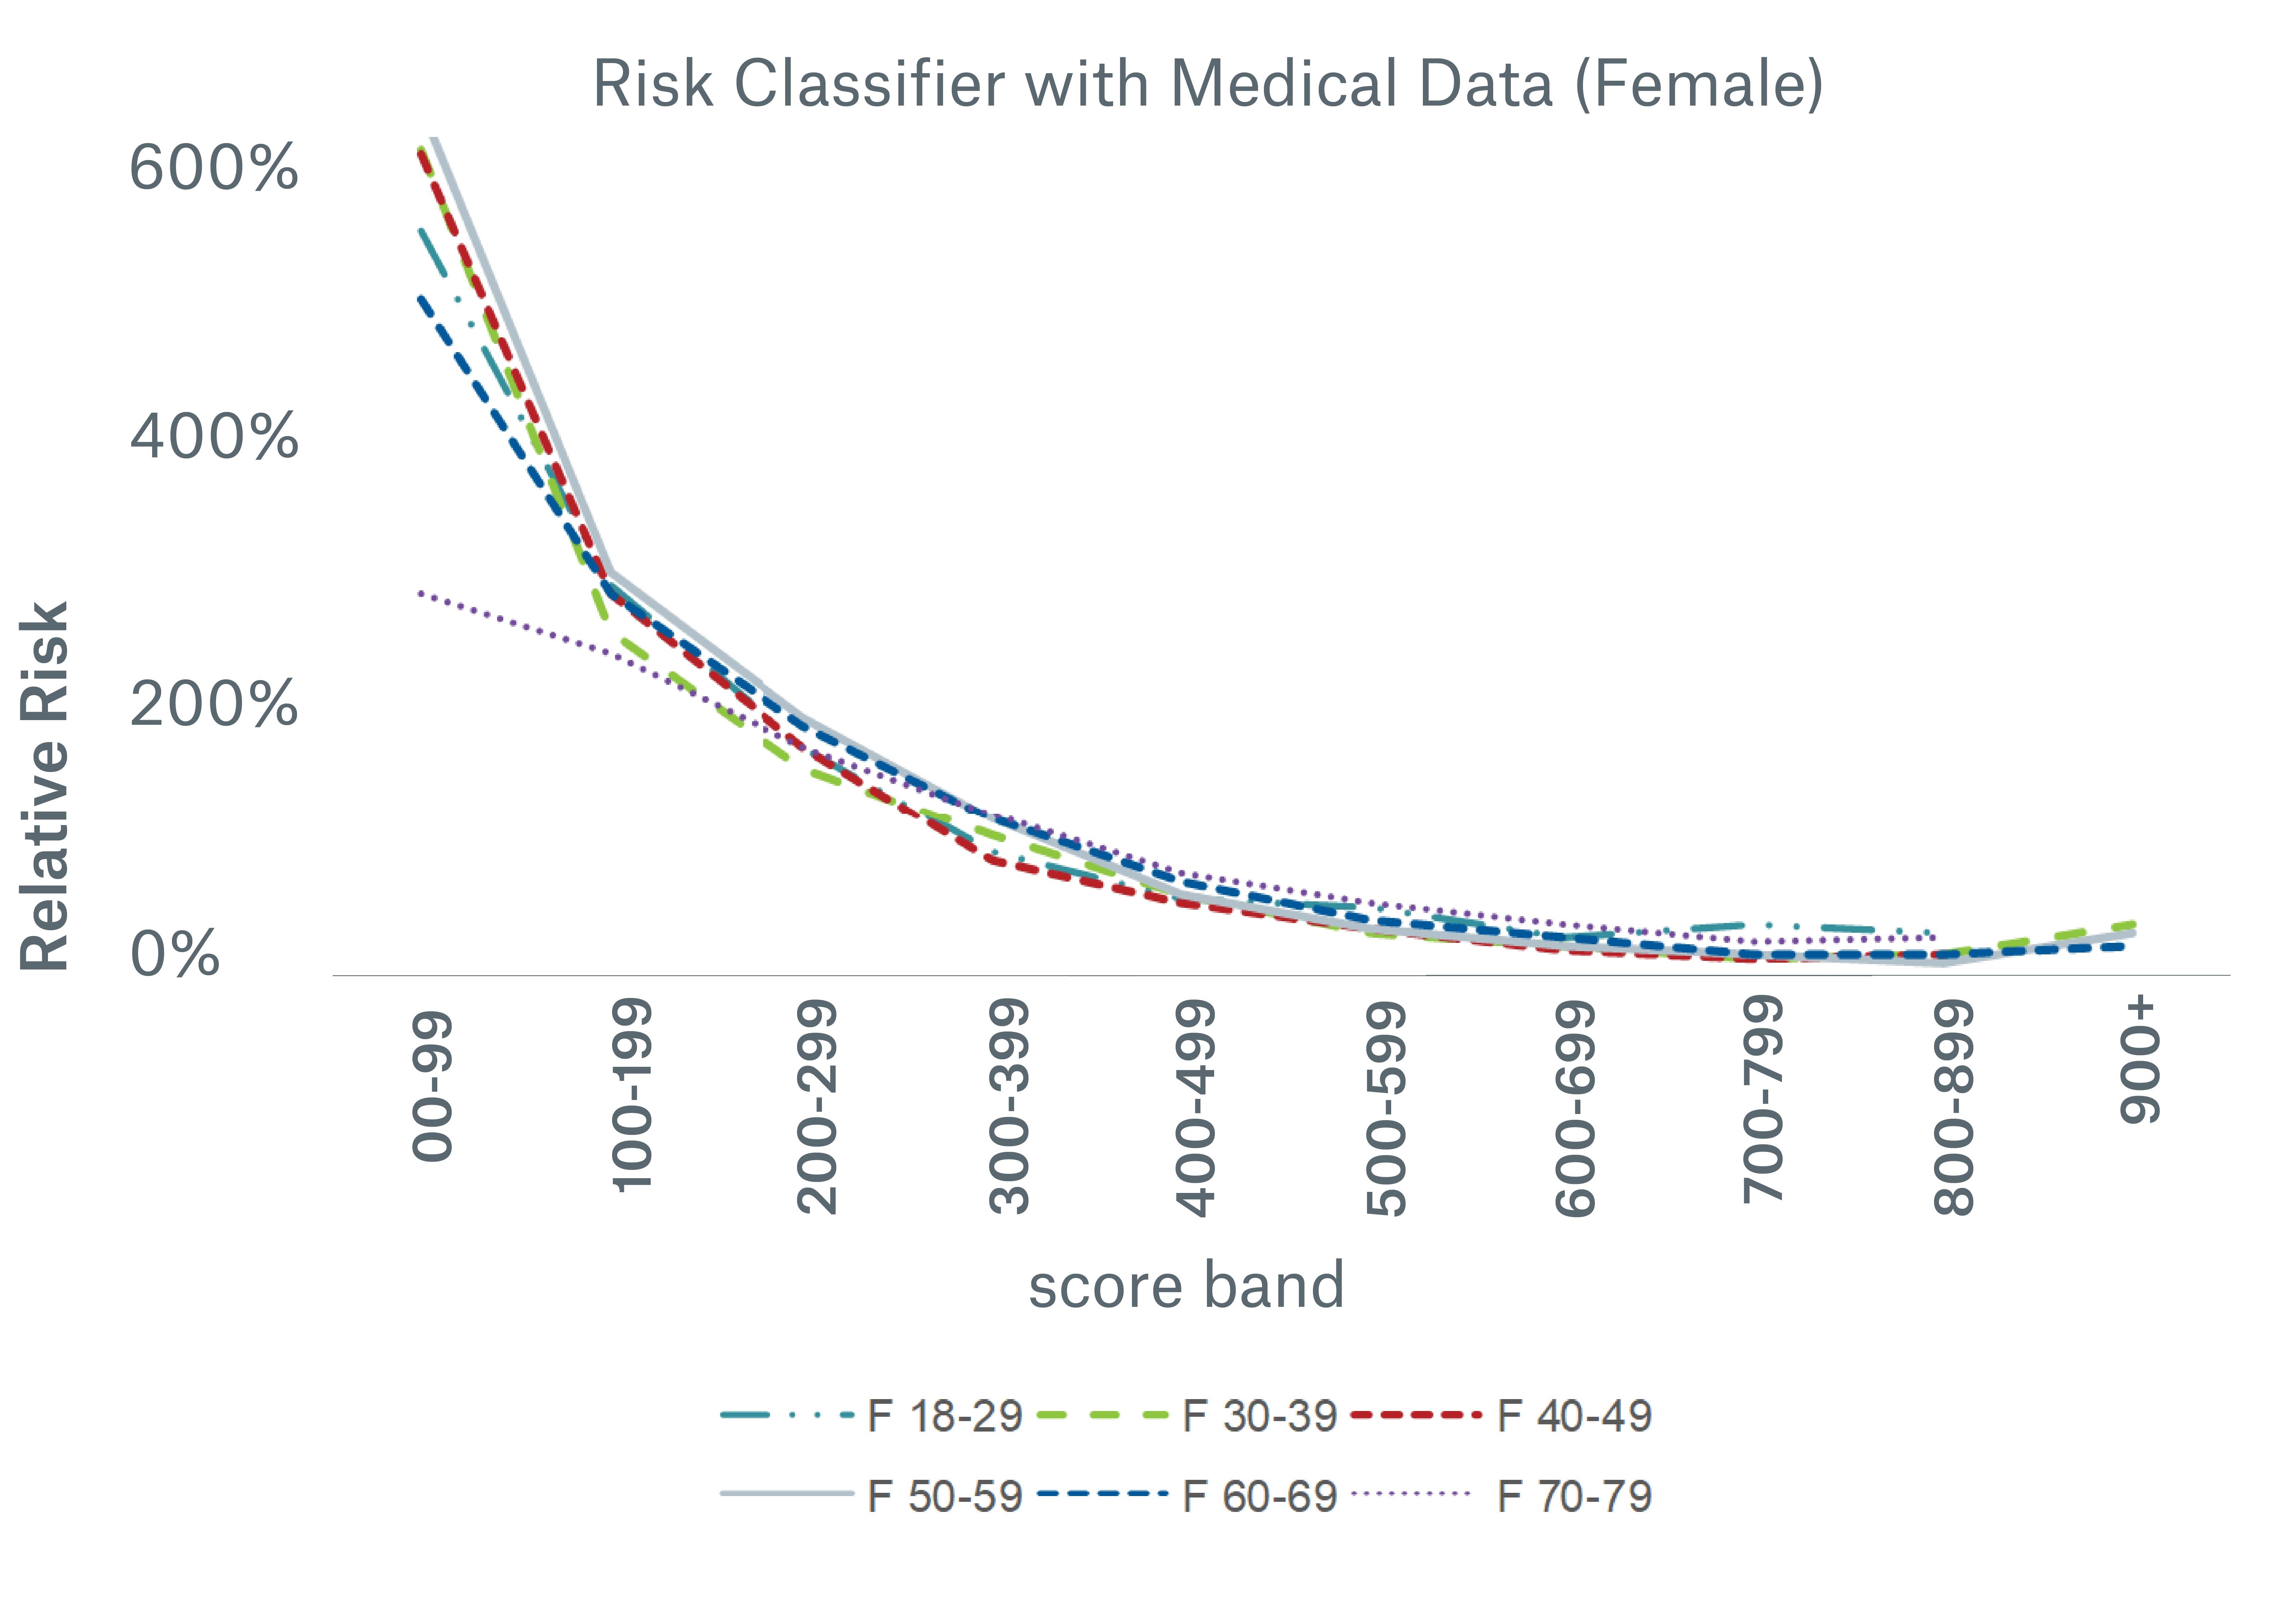 Figure 5 shows the relative risk curves for Risk Classifier with Medical Data following a similar pattern across gender/age combinations. 